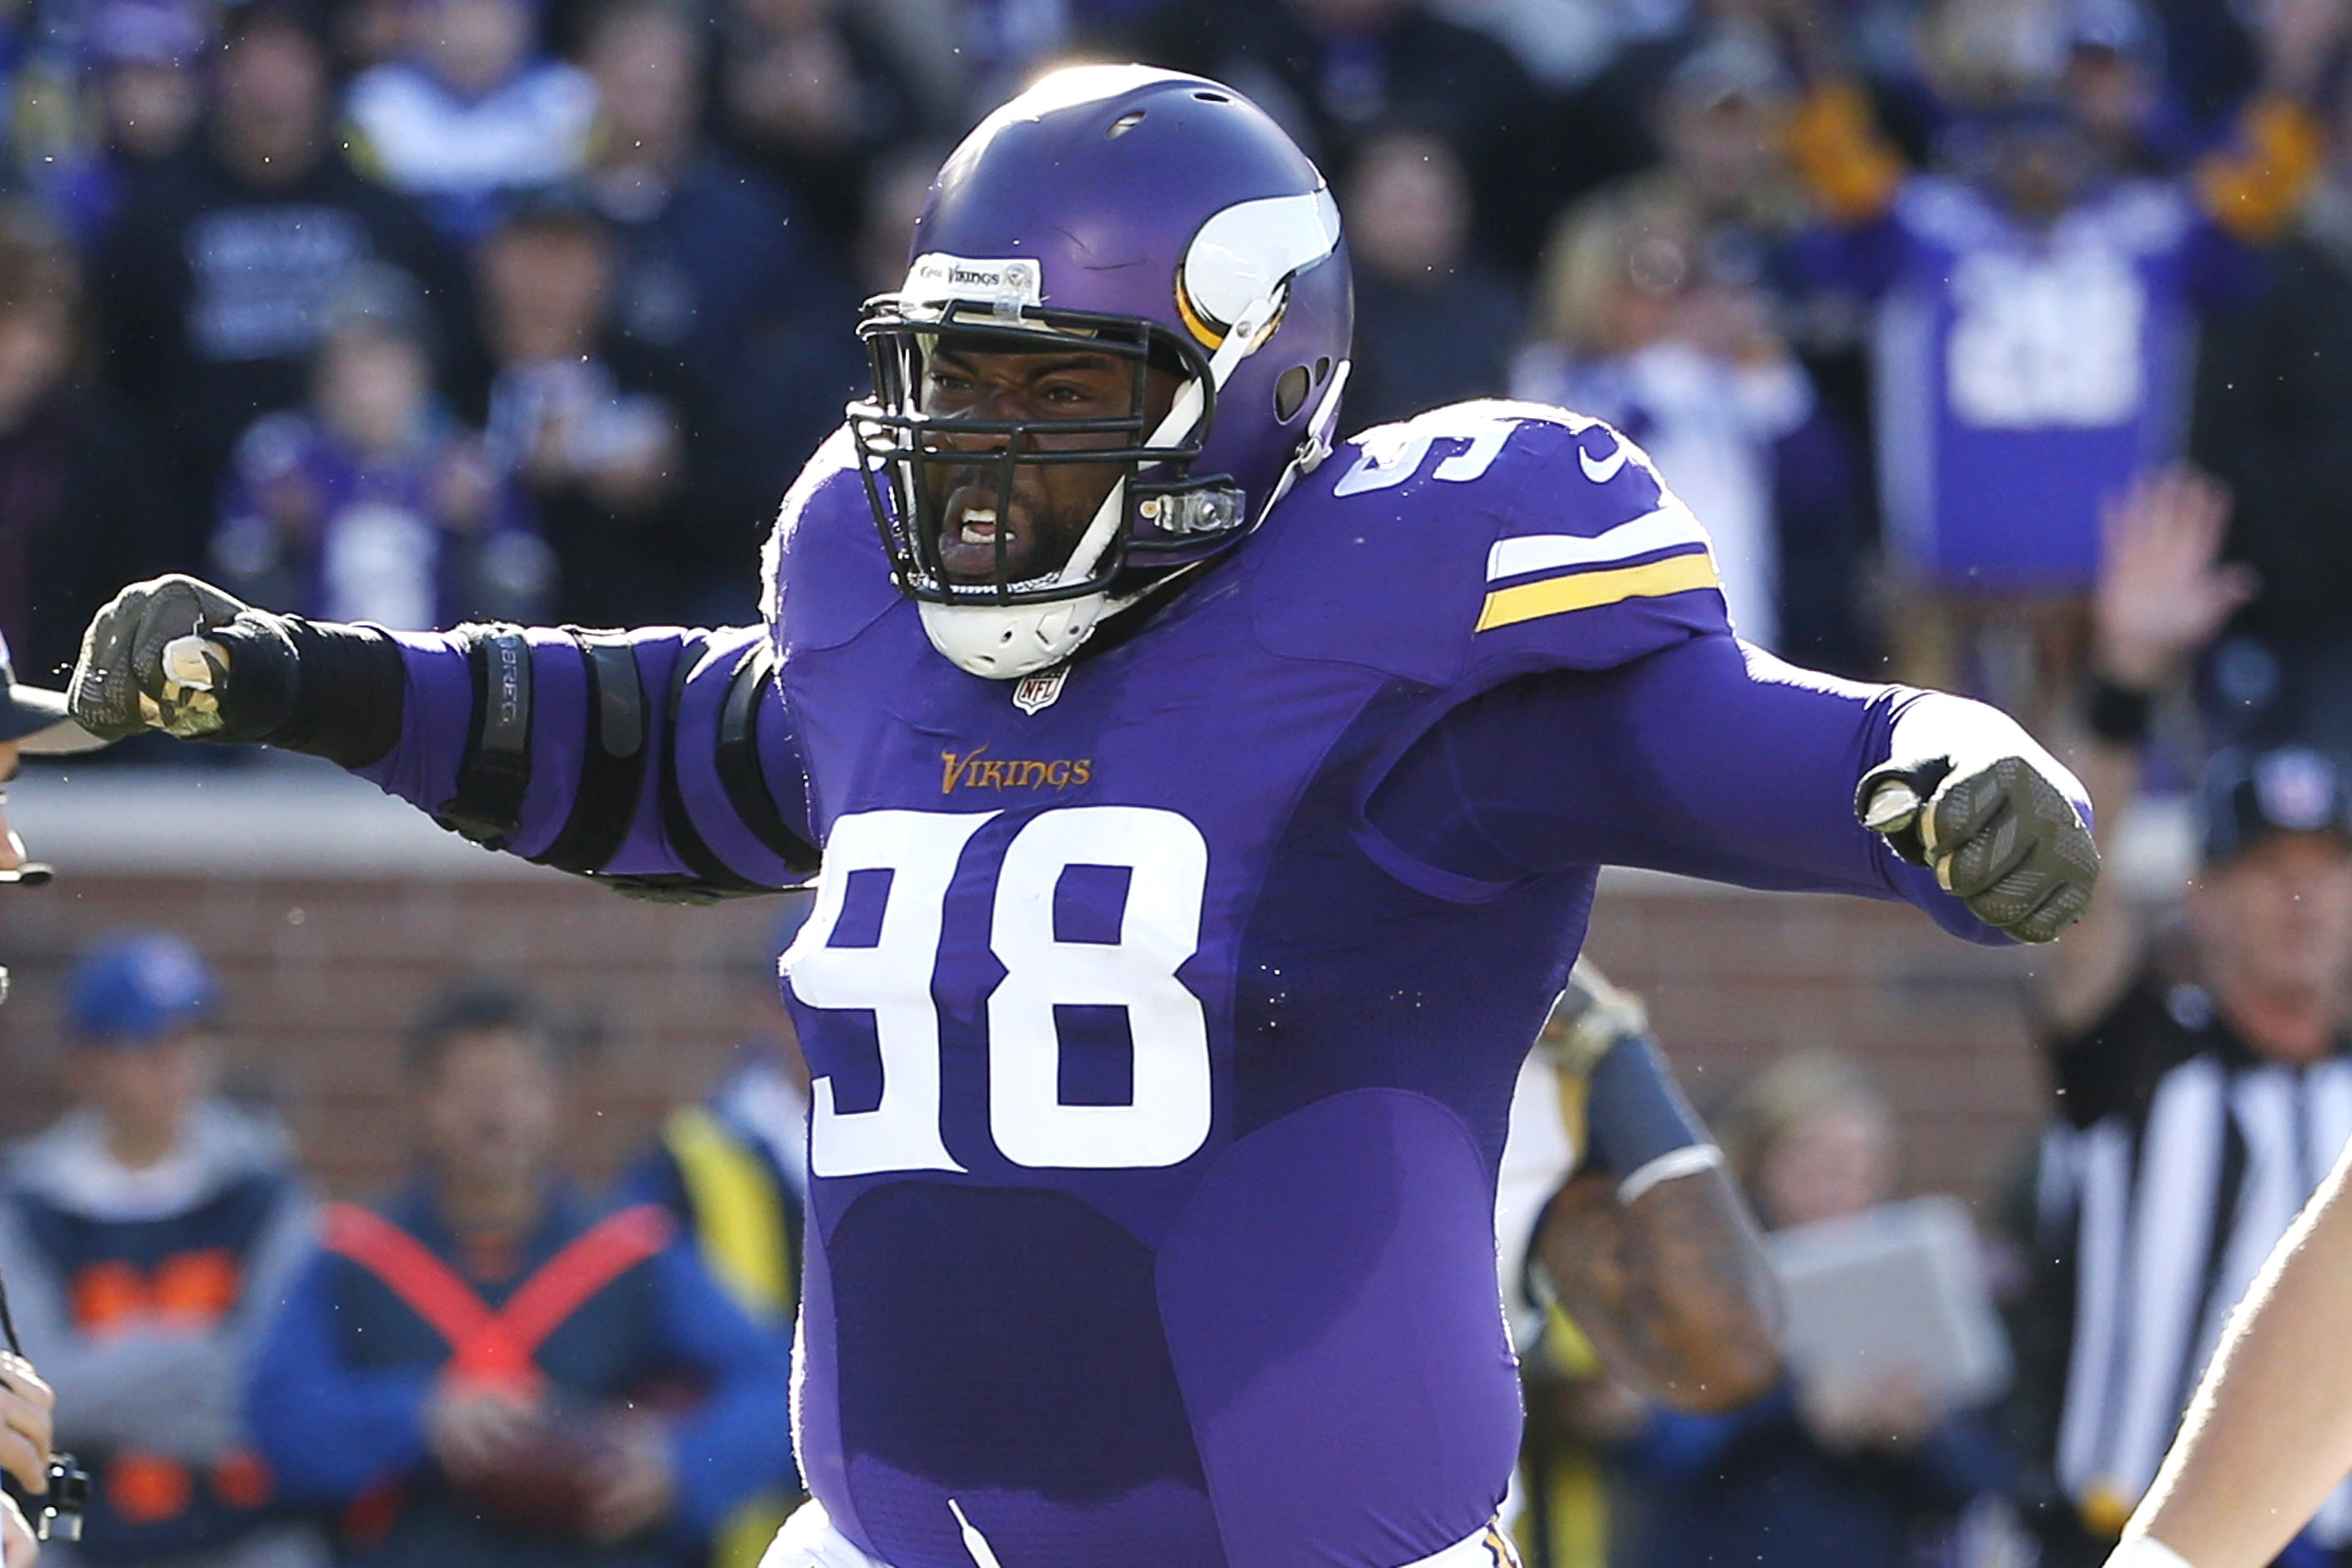 St. Croix's Linval Joseph Figures Prominently In Vikings' Dismantling of The Lions 30-23 On Thanksgiving Day